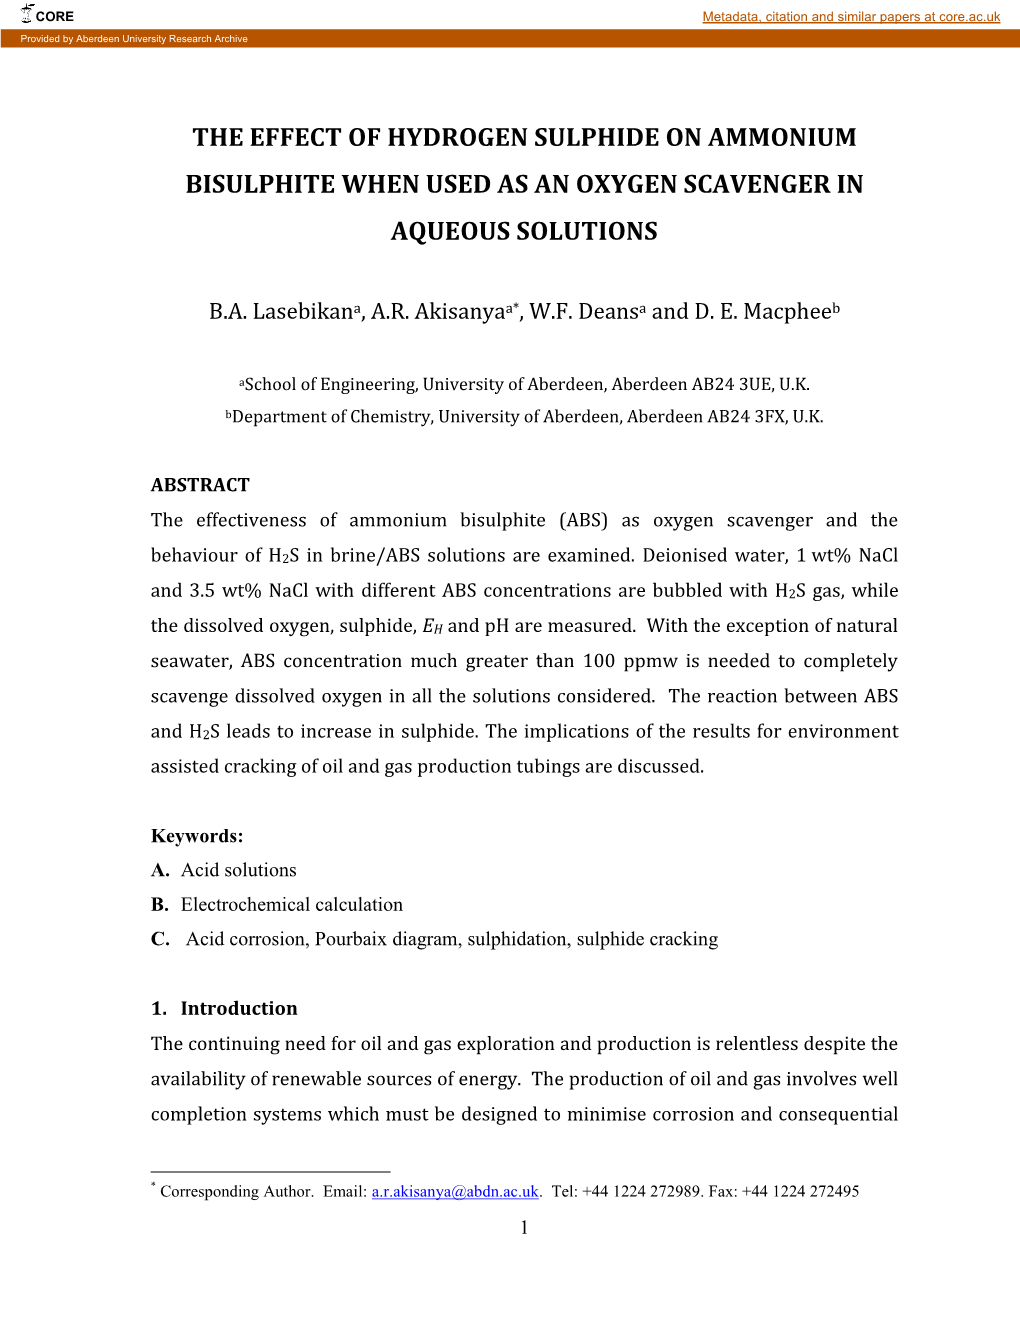 The Effect of Hydrogen Sulphide on Ammonium Bisulphite When Used As an Oxygen Scavenger in Aqueous Solutions